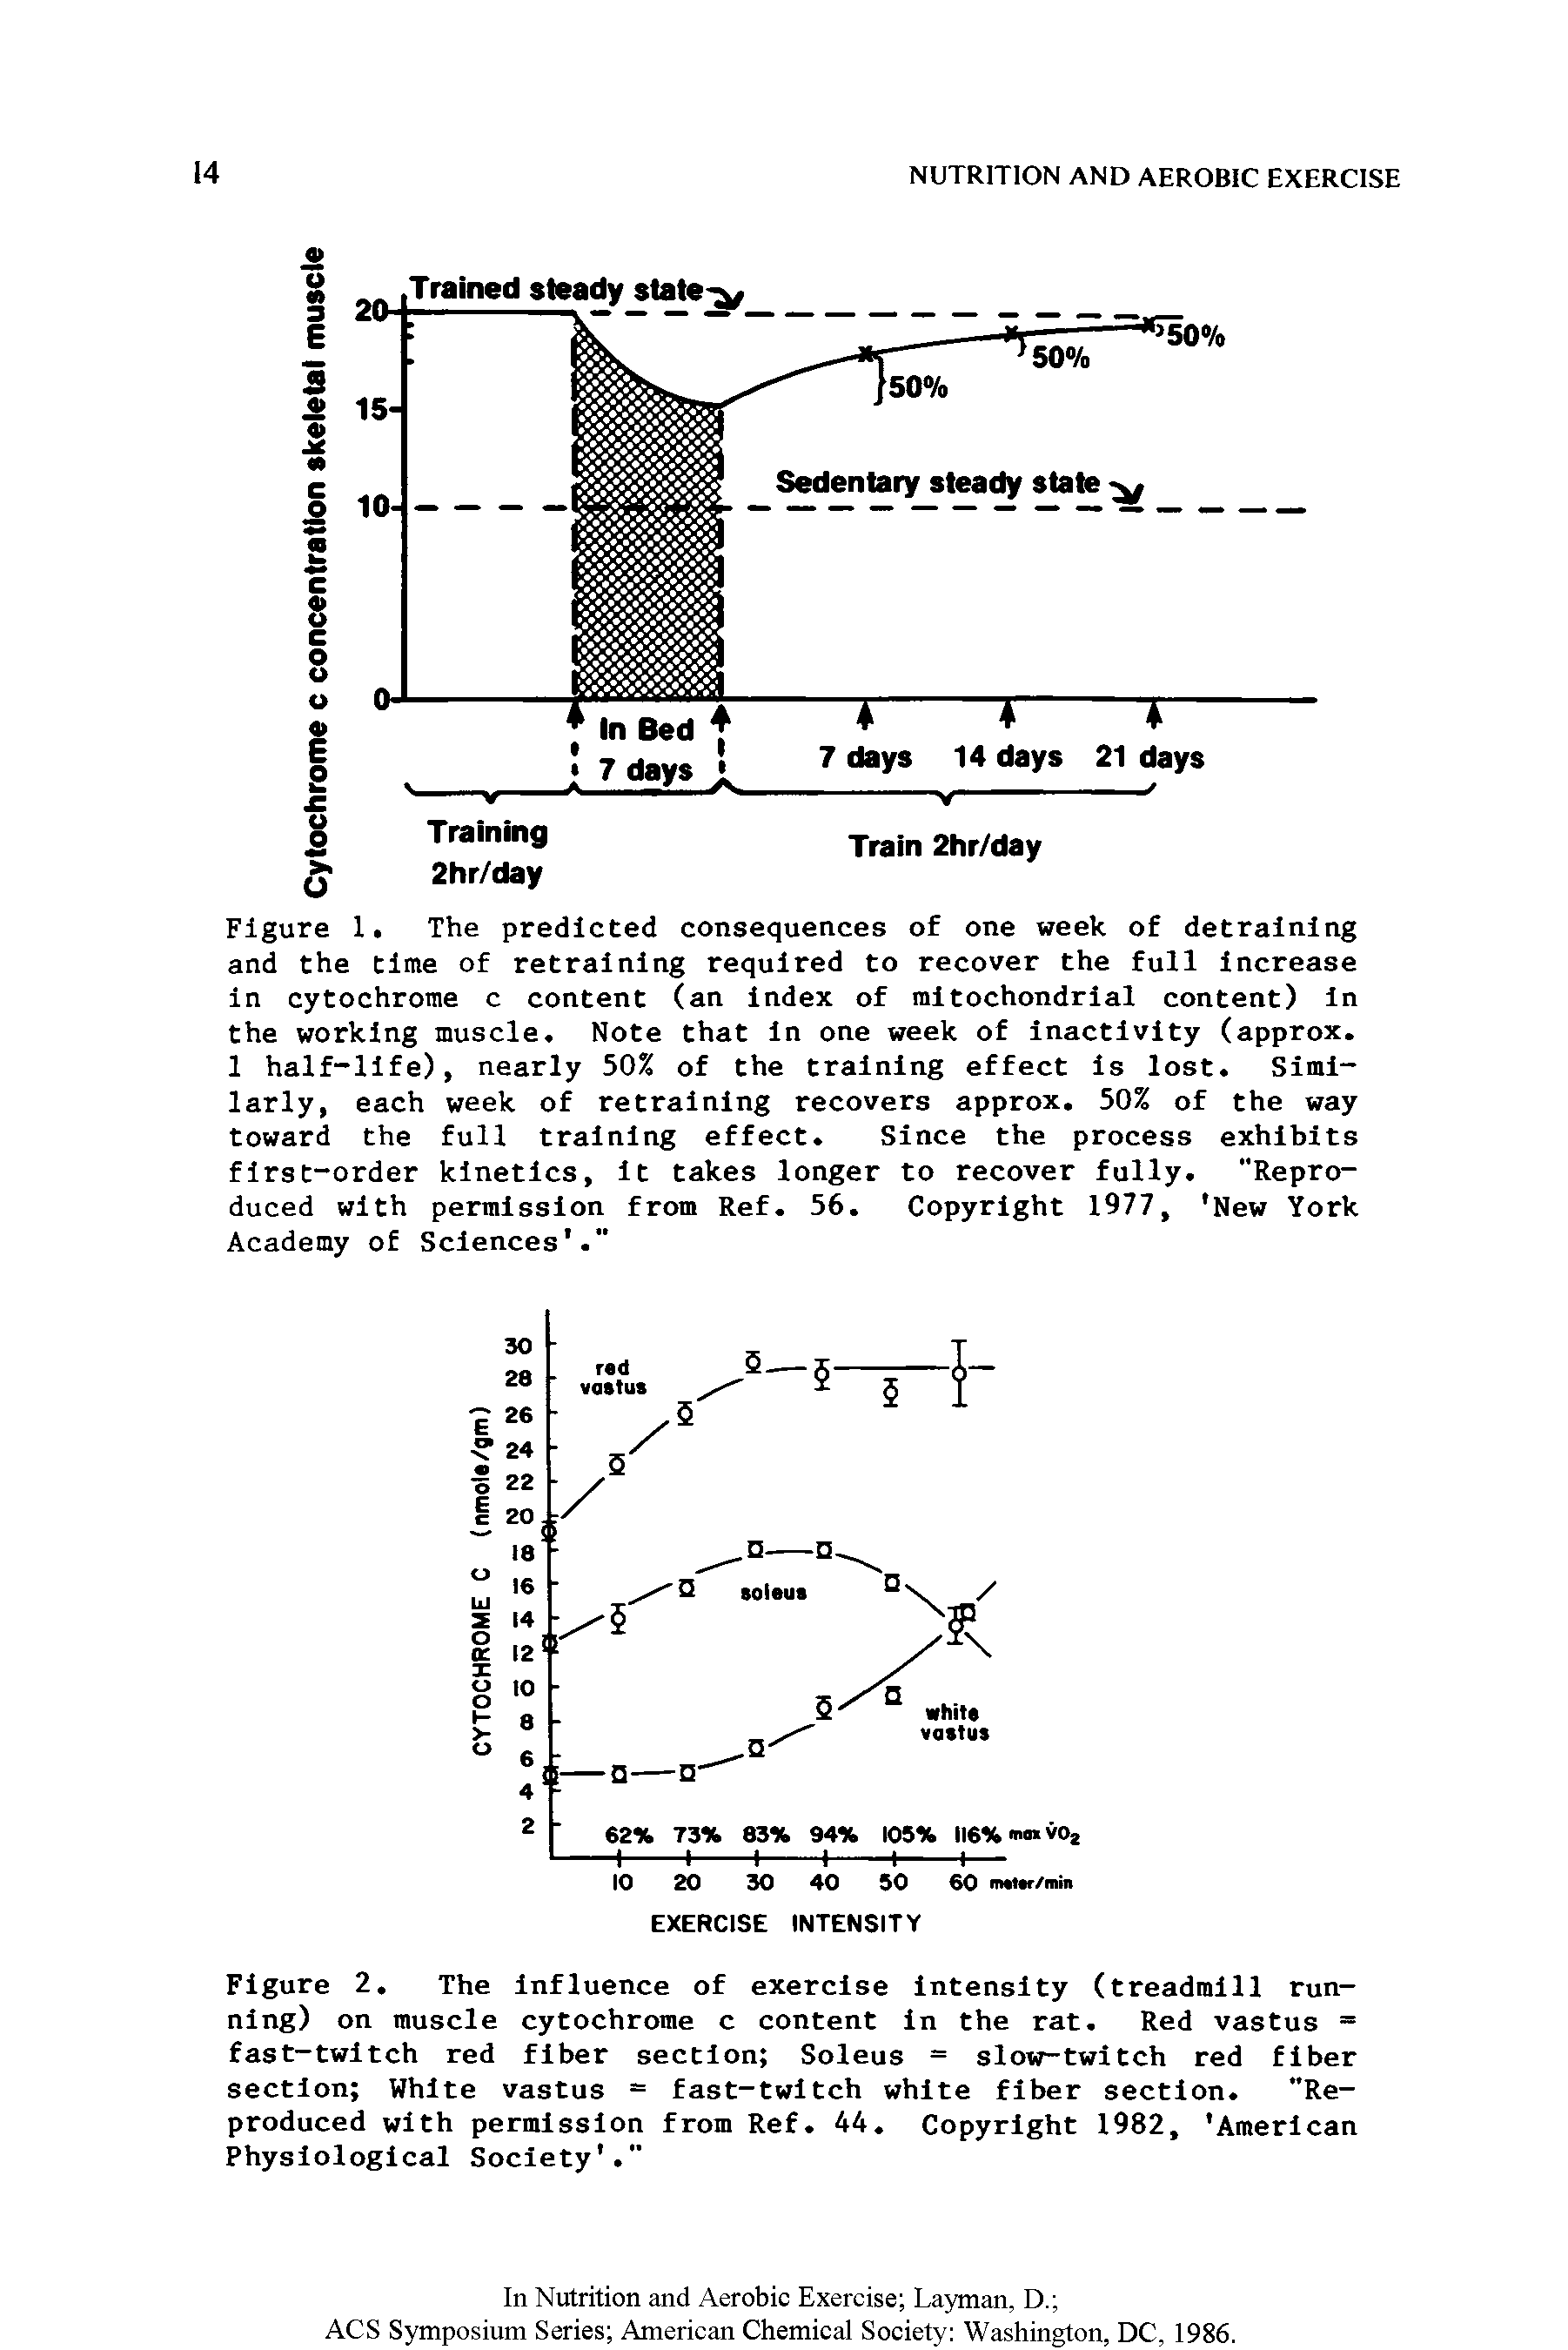 Figure 2. The Influence of exercise intensity (treadmill running) on muscle cytochrome c content in the rat. Red vastus = fast-twitch red fiber section Soleus = slow-twitch red fiber section White vastus = fast-twitch white fiber section. "Reproduced with permission from Ref. 44. Copyright 1982, American Physiological Society. "...